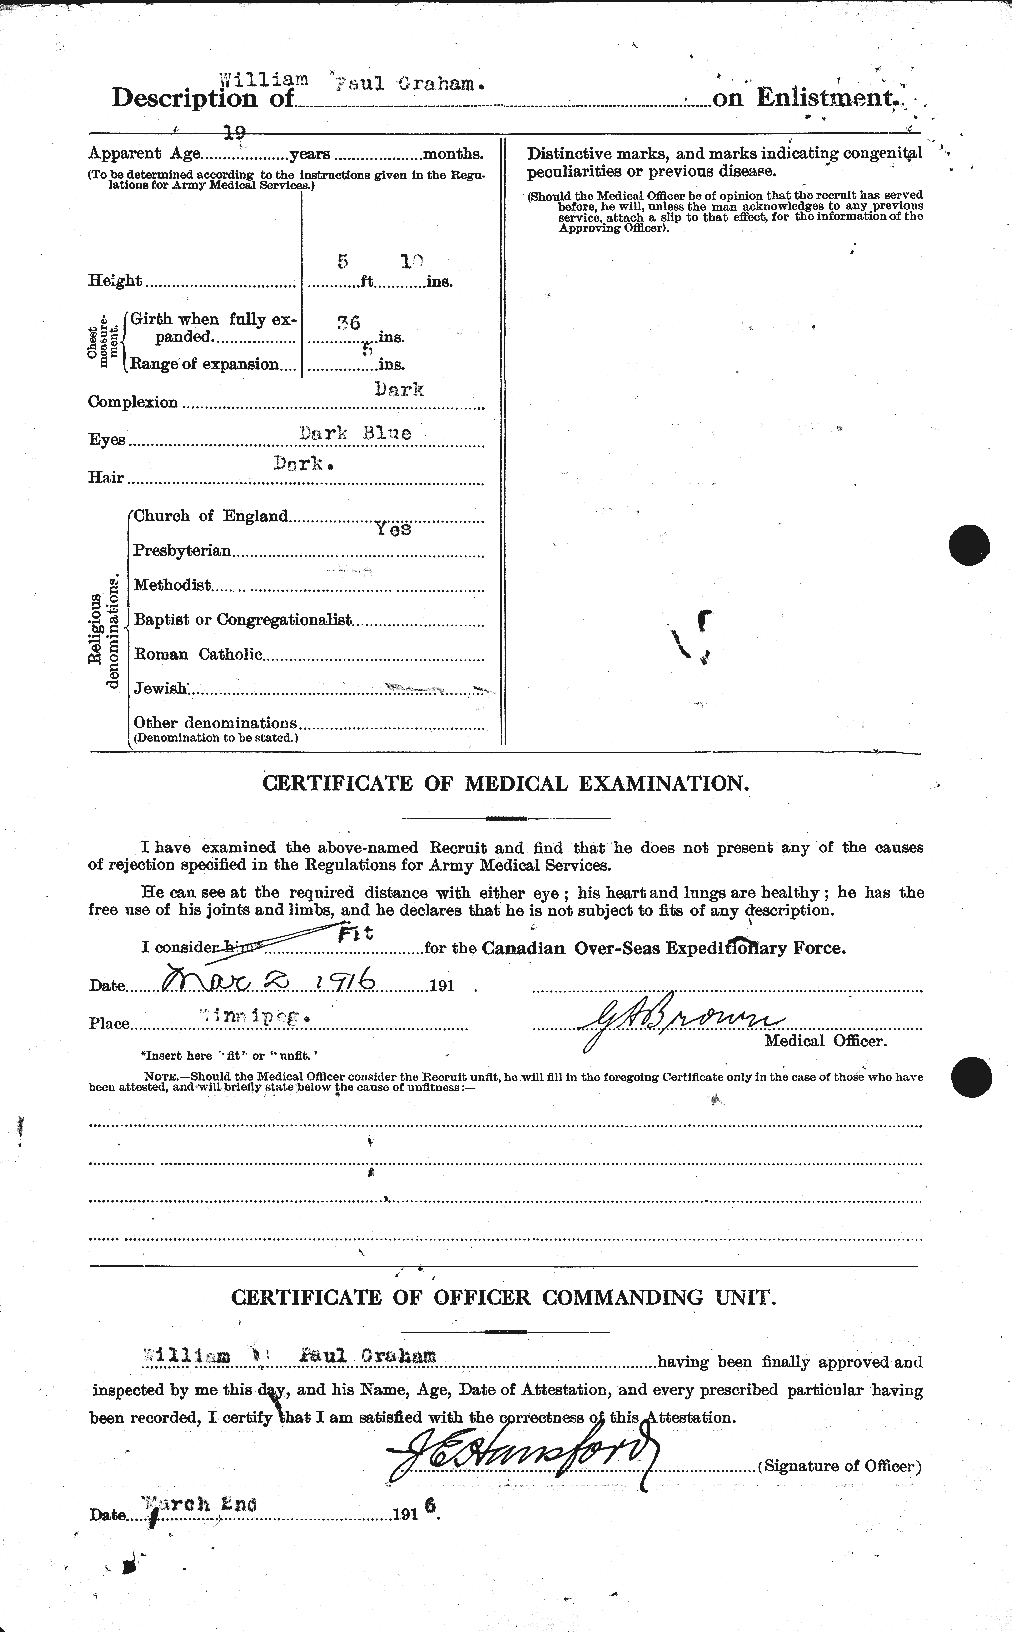 Personnel Records of the First World War - CEF 358030b